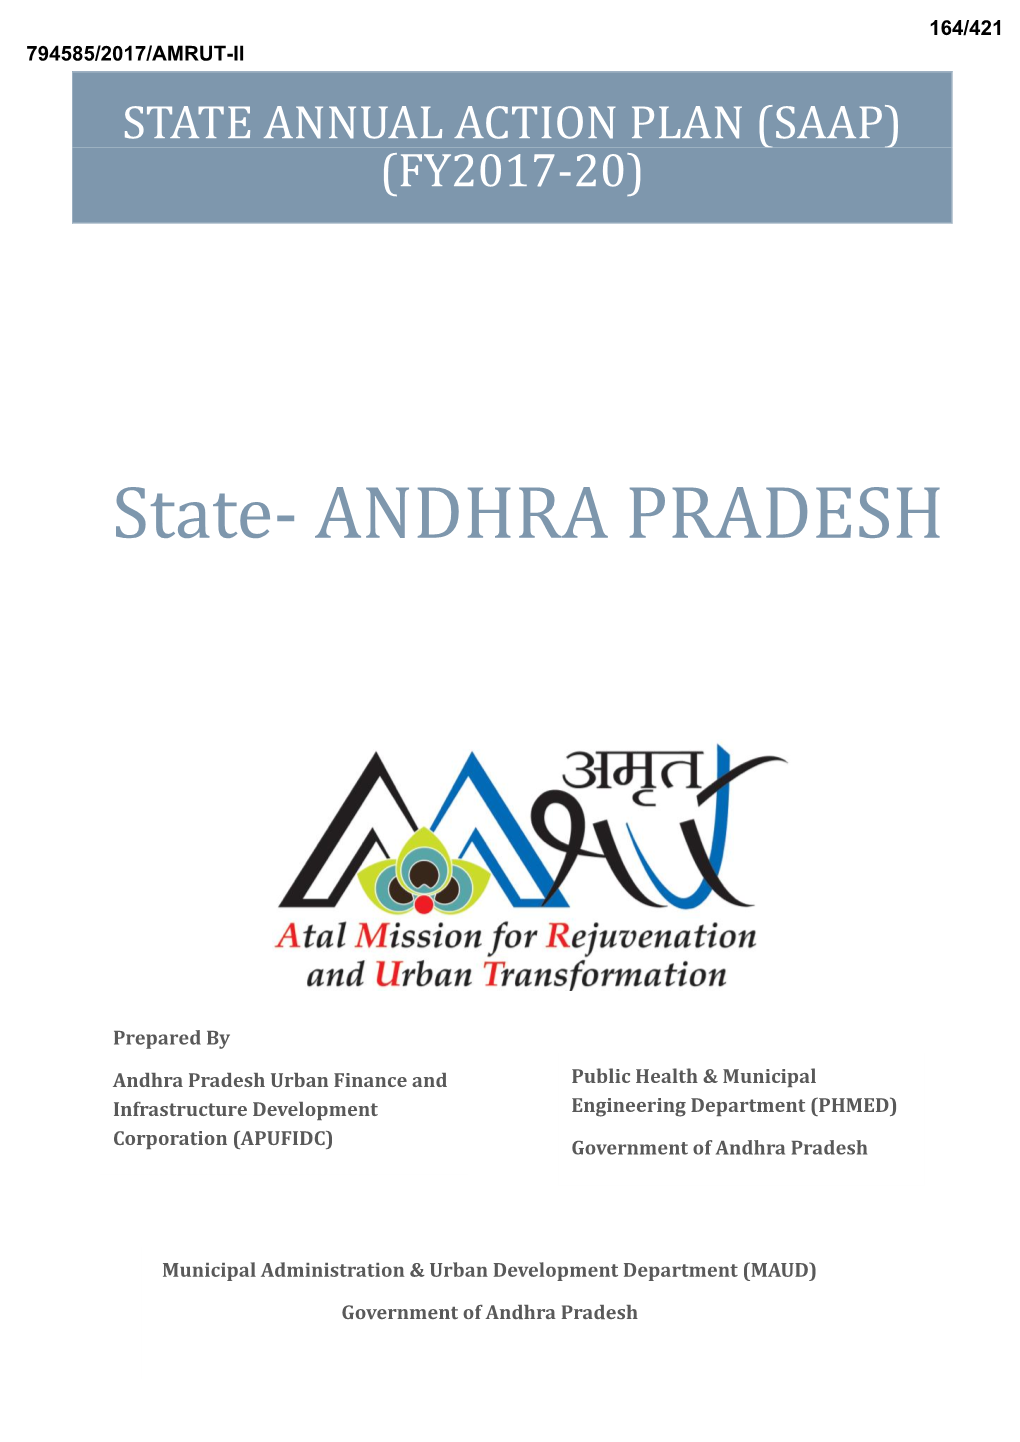 STATE ANNUAL ACTION PLAN (SAAP) for Andhra Pradesh